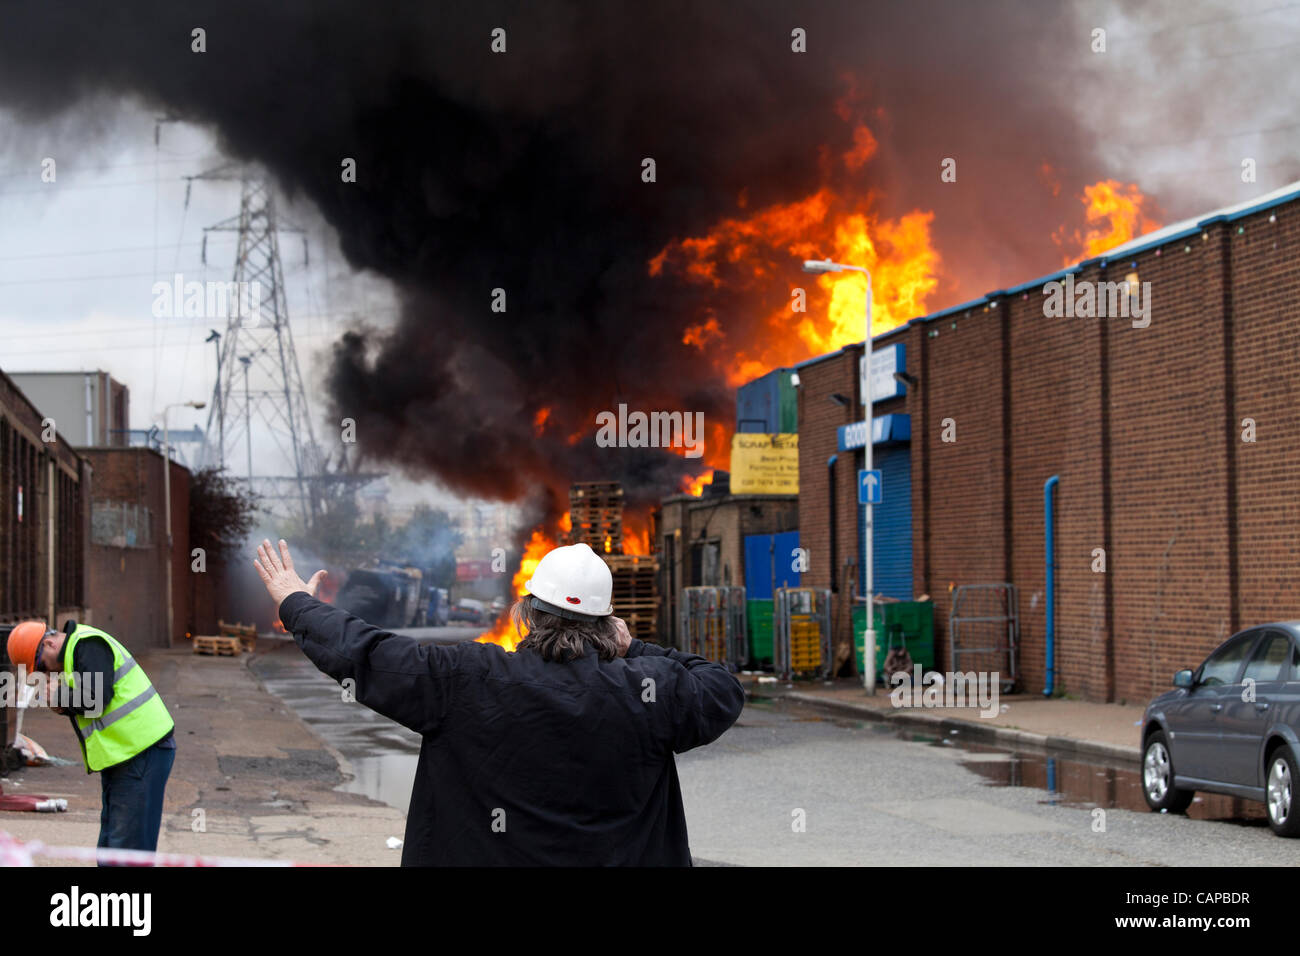 London, UK. 05 April, 2012. Fire at Bidder St, Canning Town, London. The fire reportedly caused power cuts for tens of thousands of people. Stock Photo